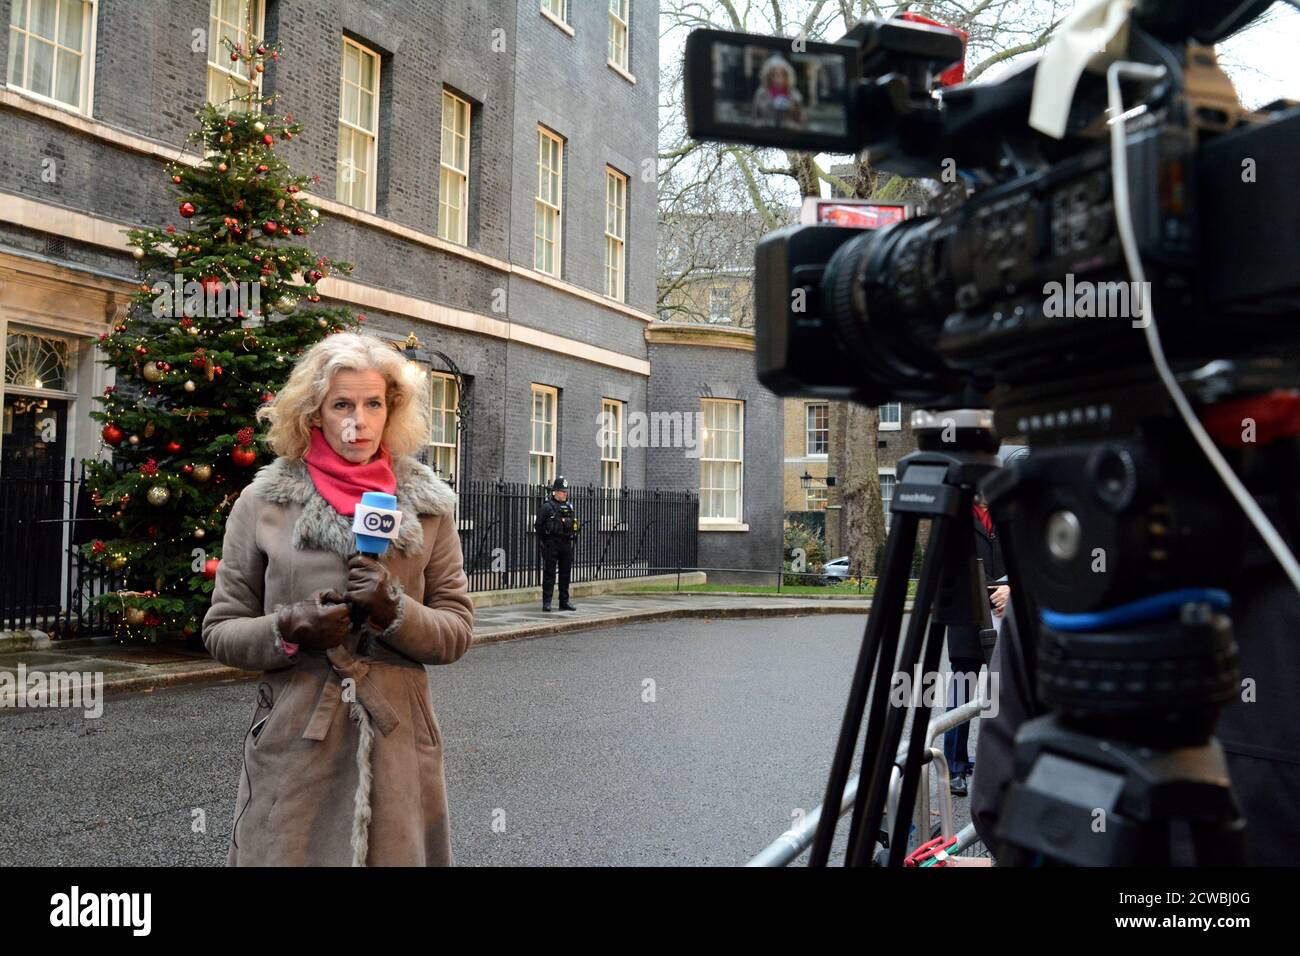 Photograph of members of the press reporting outside of 10 Downing Street Stock Photo